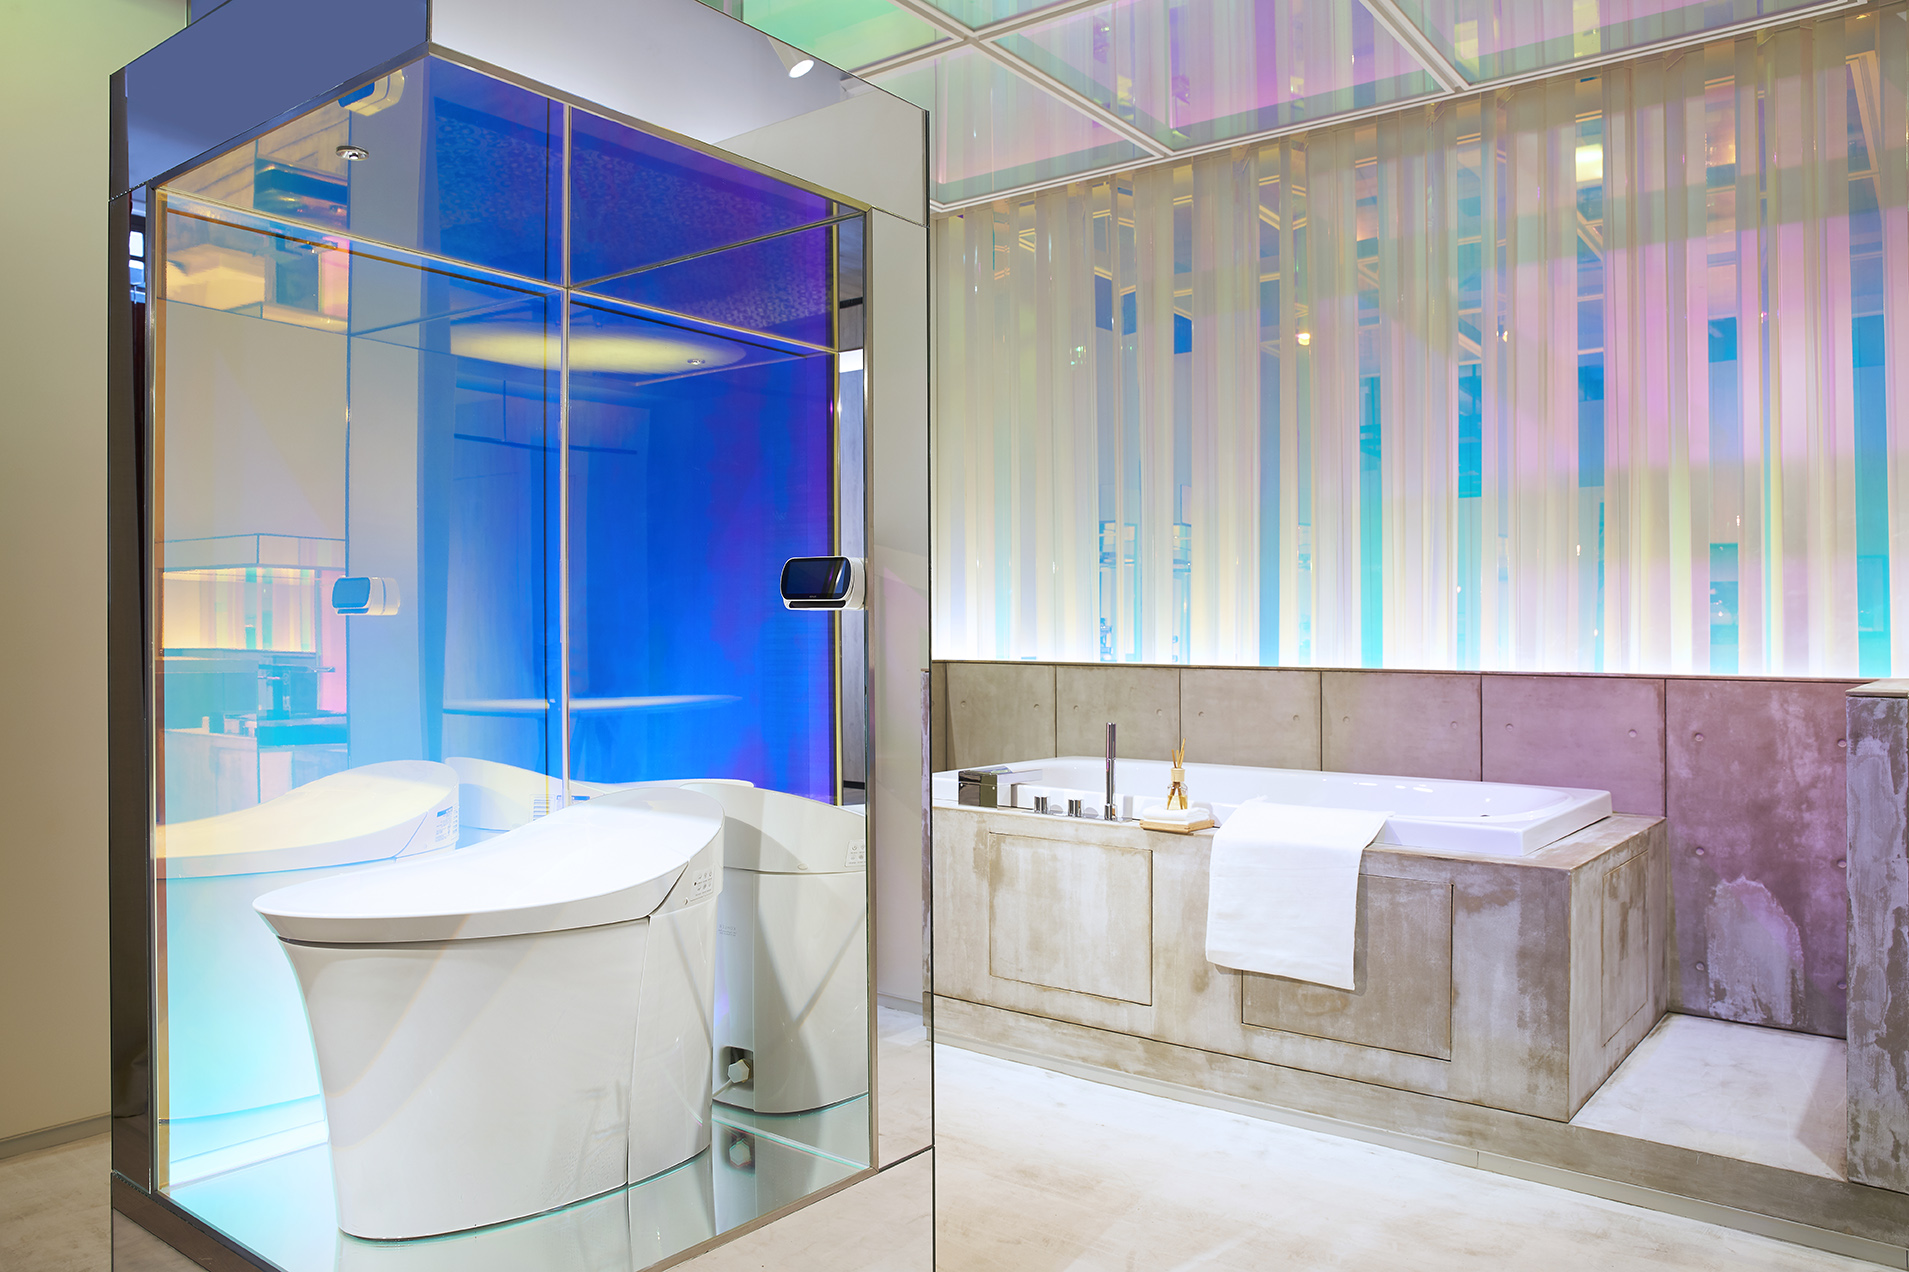 Have You Been to the Kohler Experience Centre Yet?